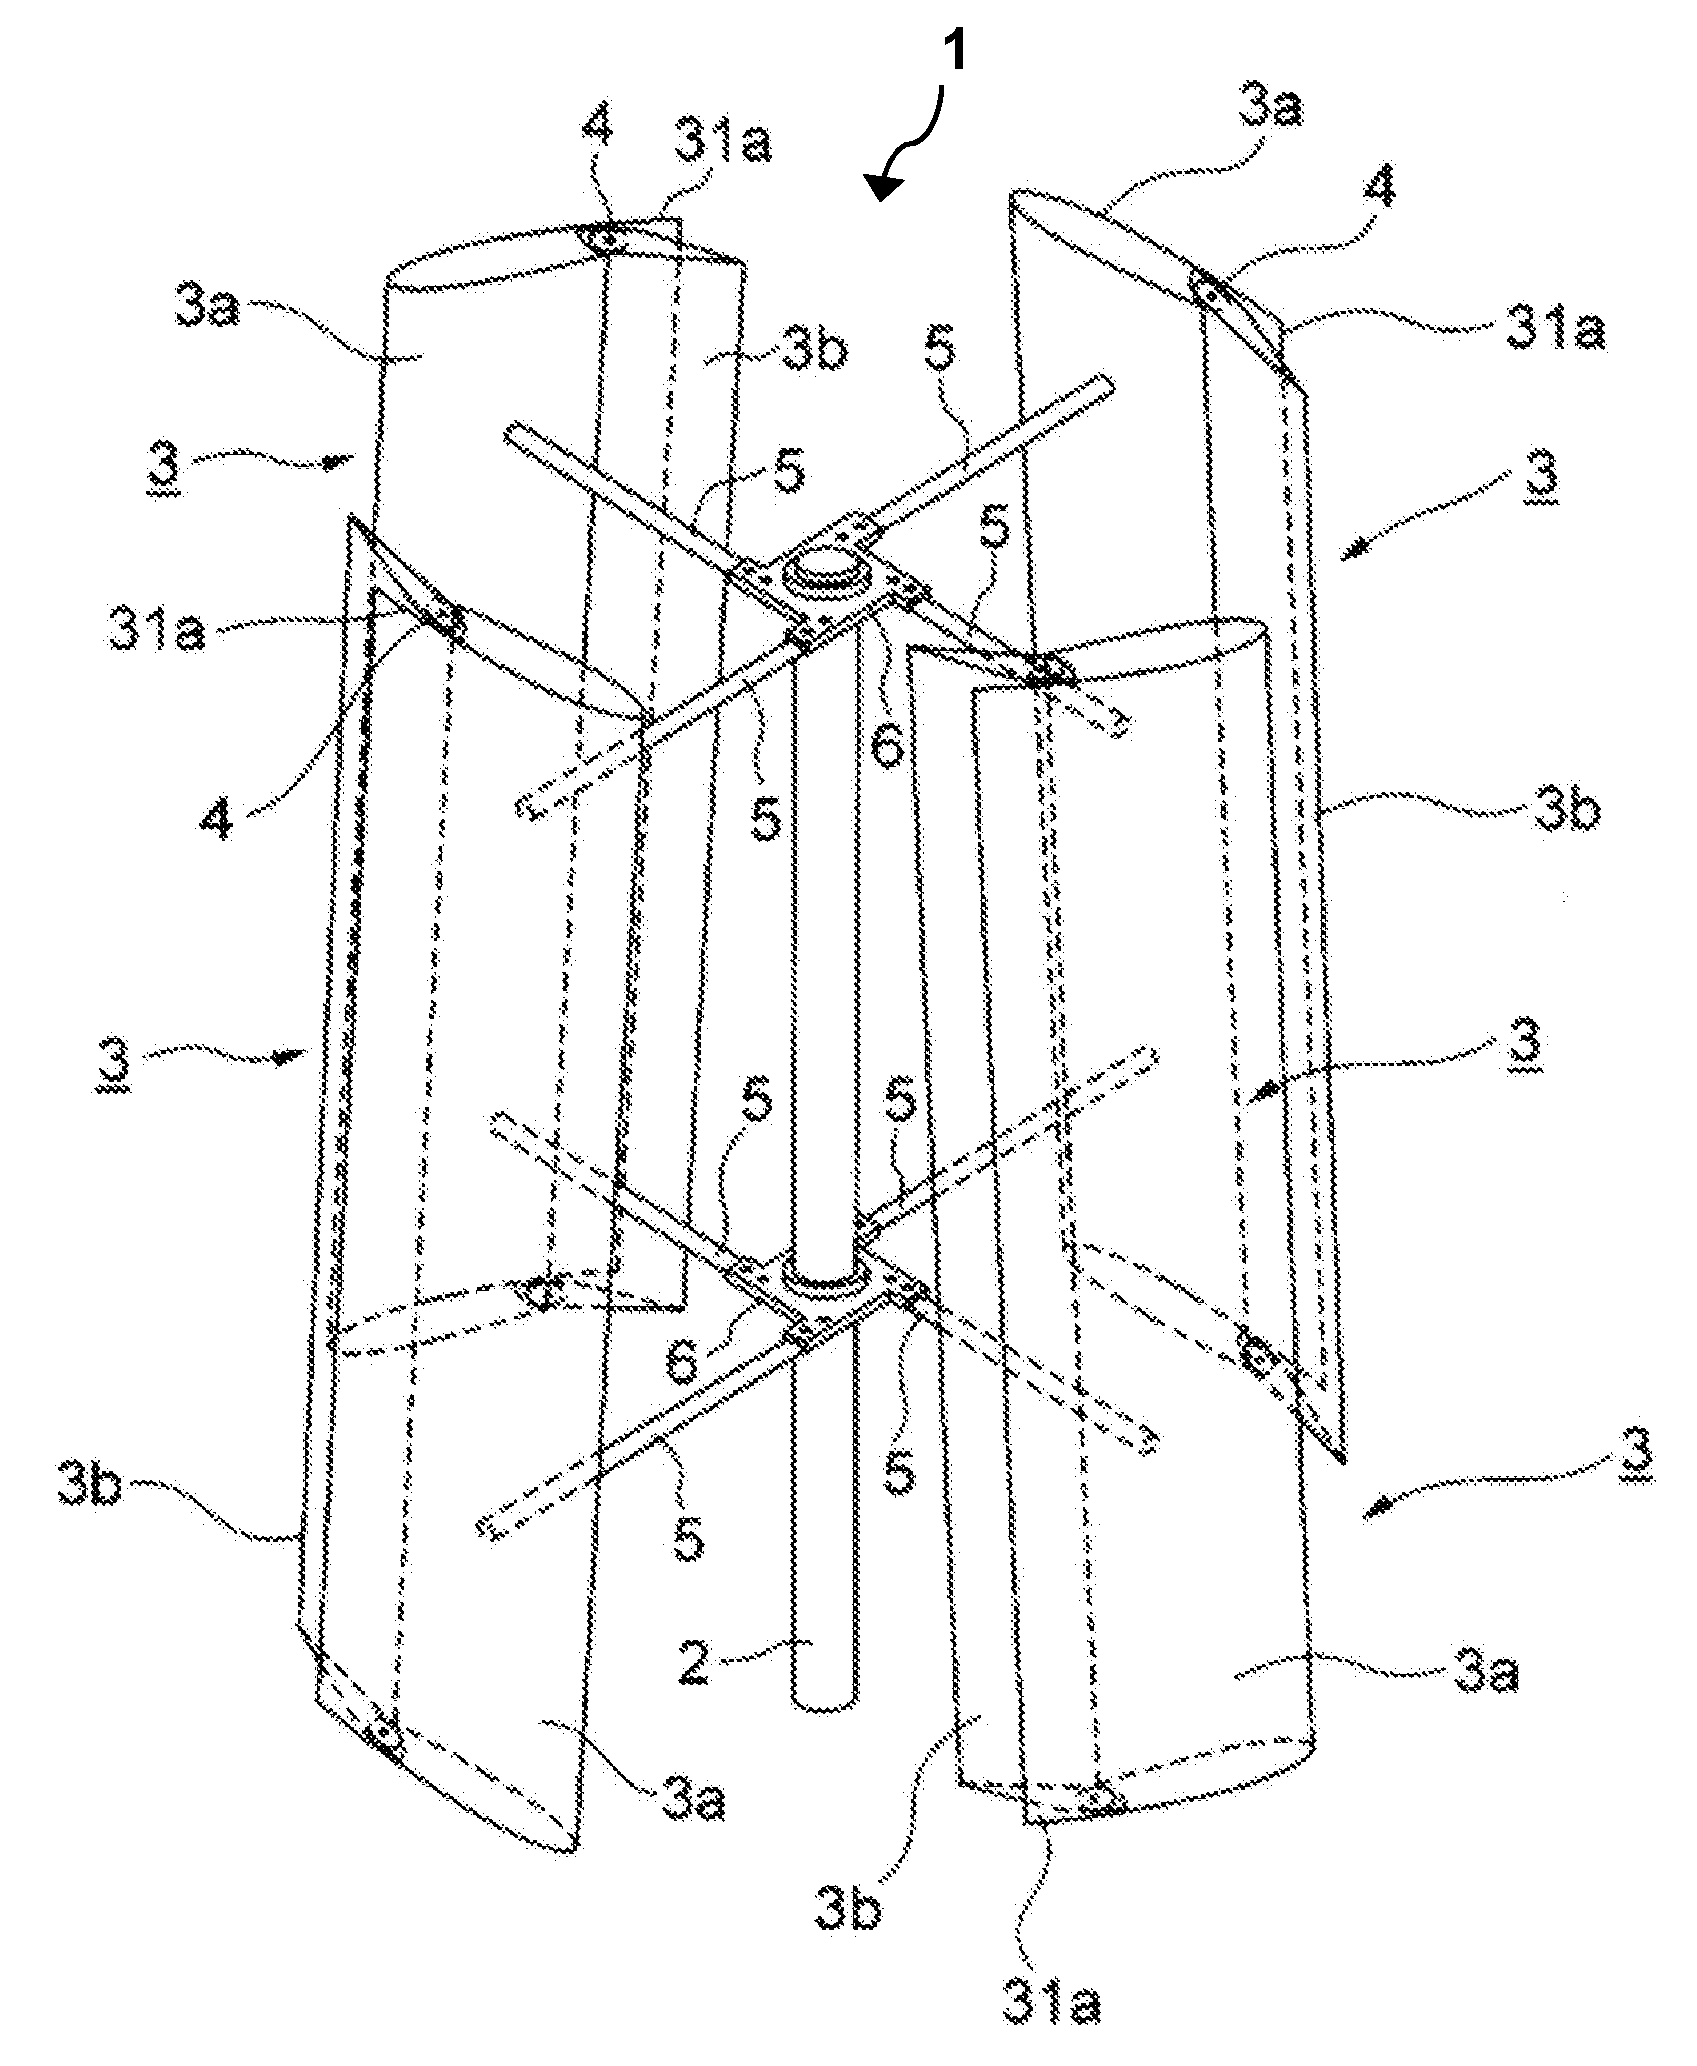 Vertical Axis Windmill And Wind Turbine System For Generating Electricity From Wind Energy